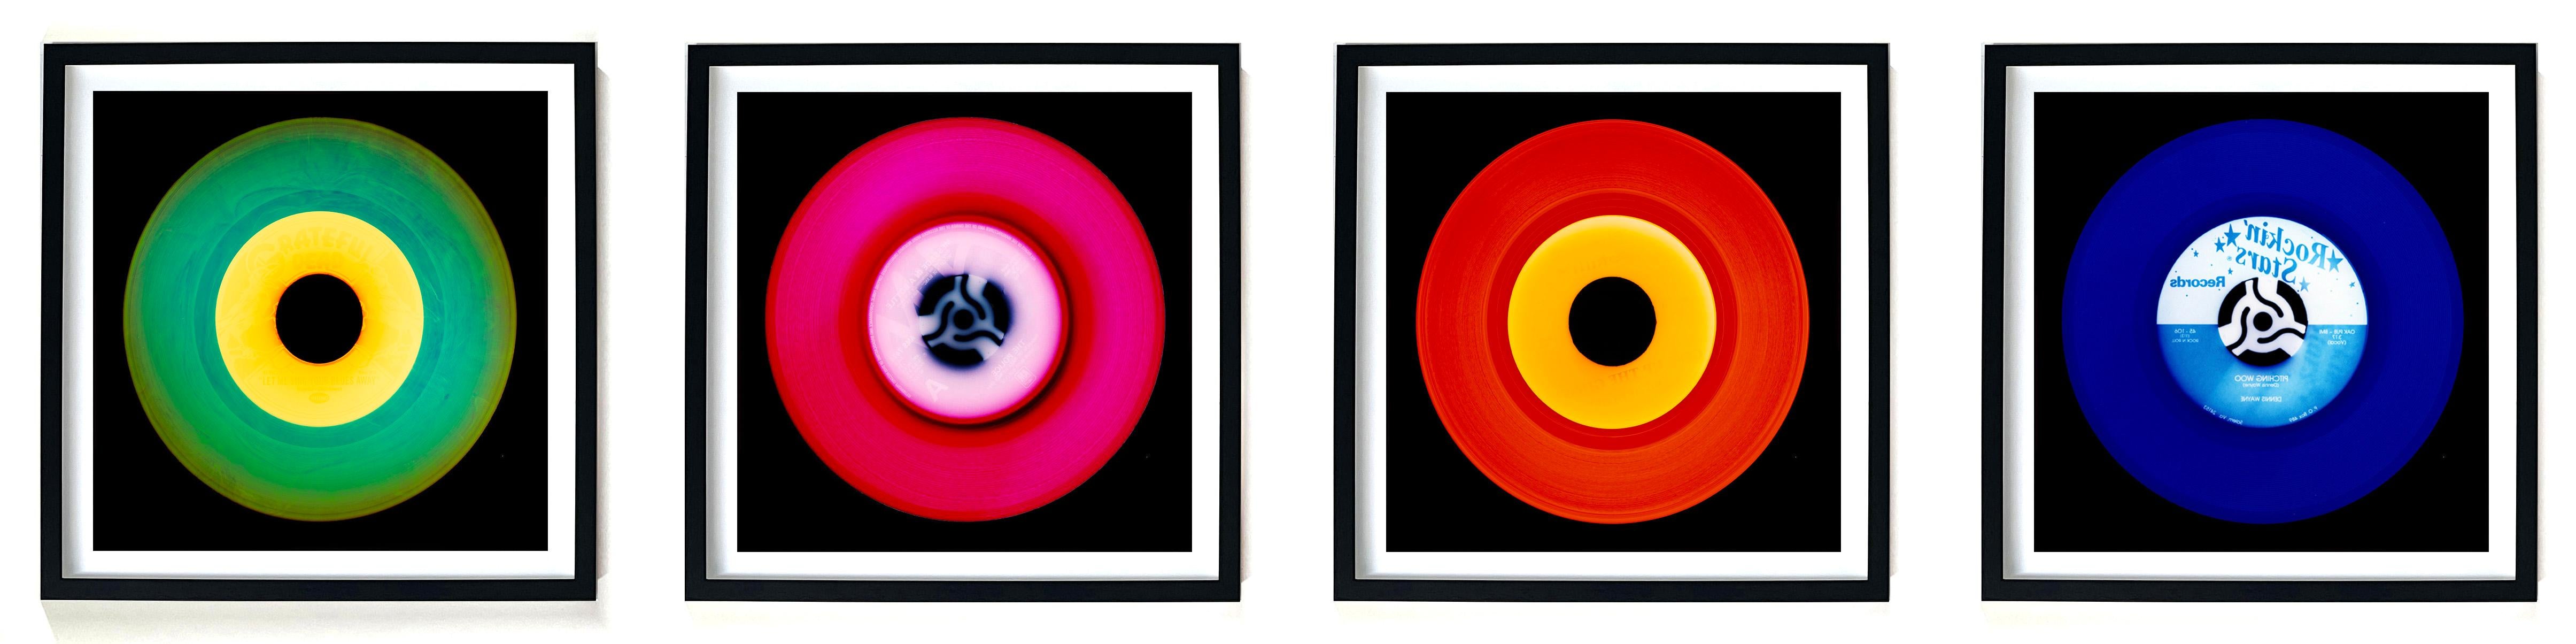 Heidler & Heeps Vinyl Collection. Acclaimed contemporary photographers, Richard Heeps and Natasha Heidler have collaborated to make this beautifully mesmerising collection. A bold multi-color pop art style celebration of the vinyl record and